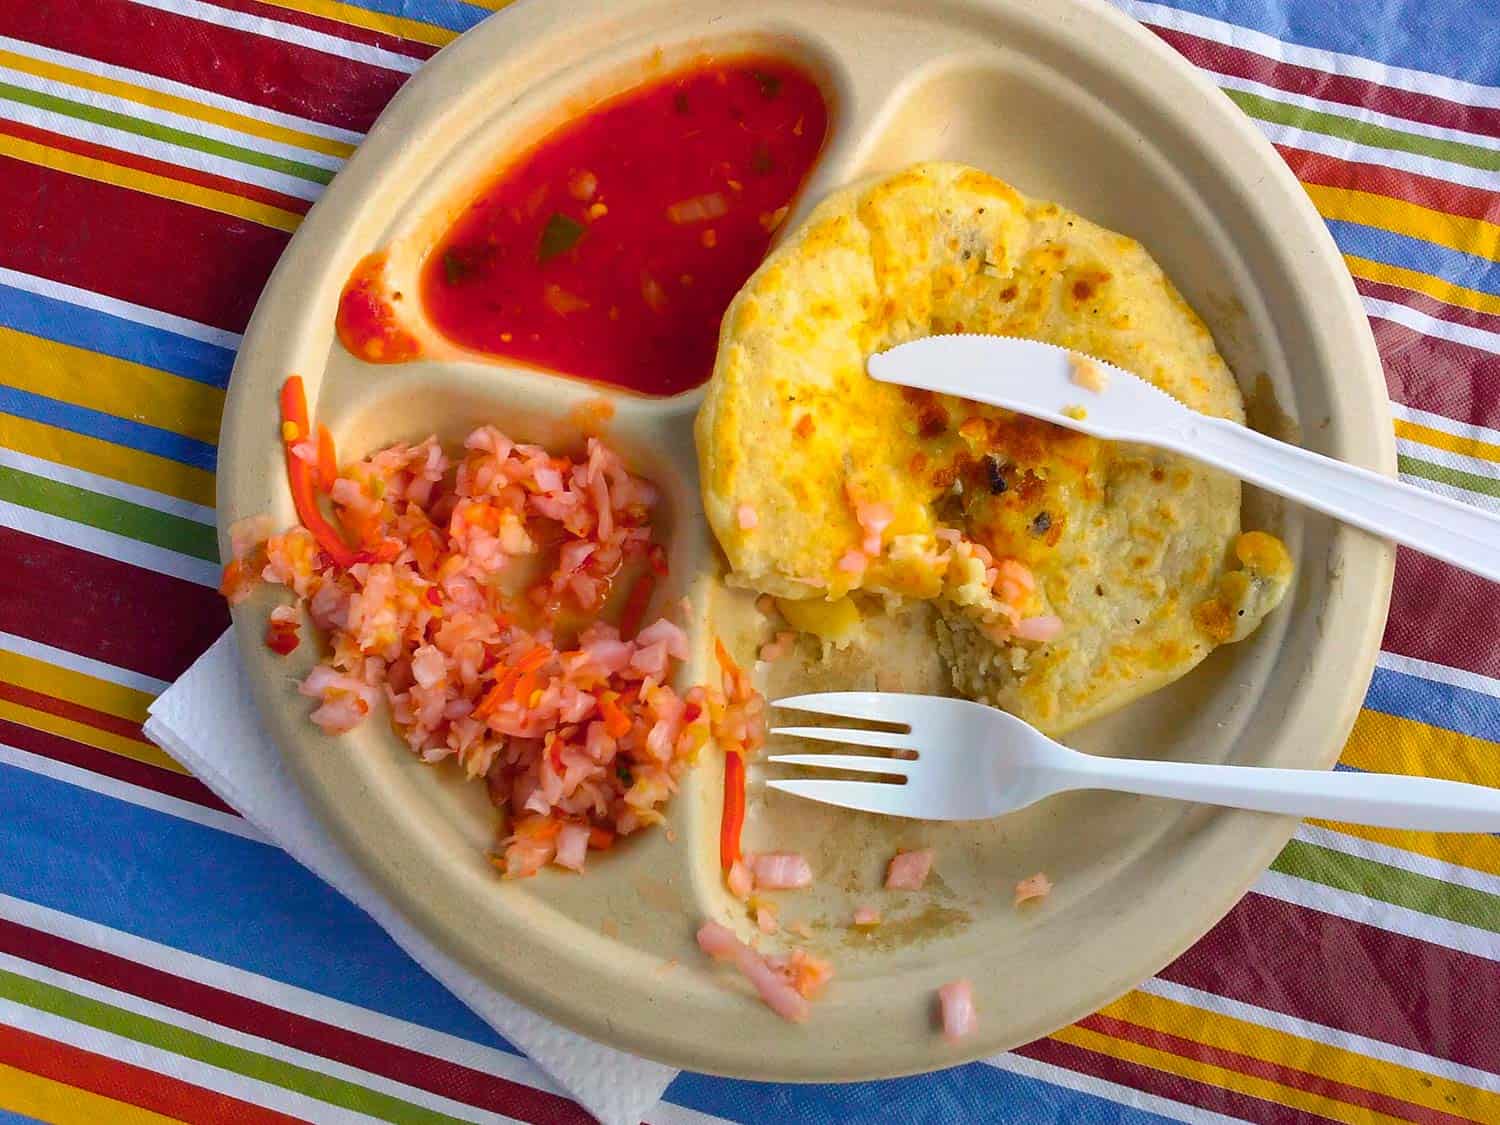 Pupusa are just one Guatemalan food you need to try in this guide to Guatemalan cuisine.